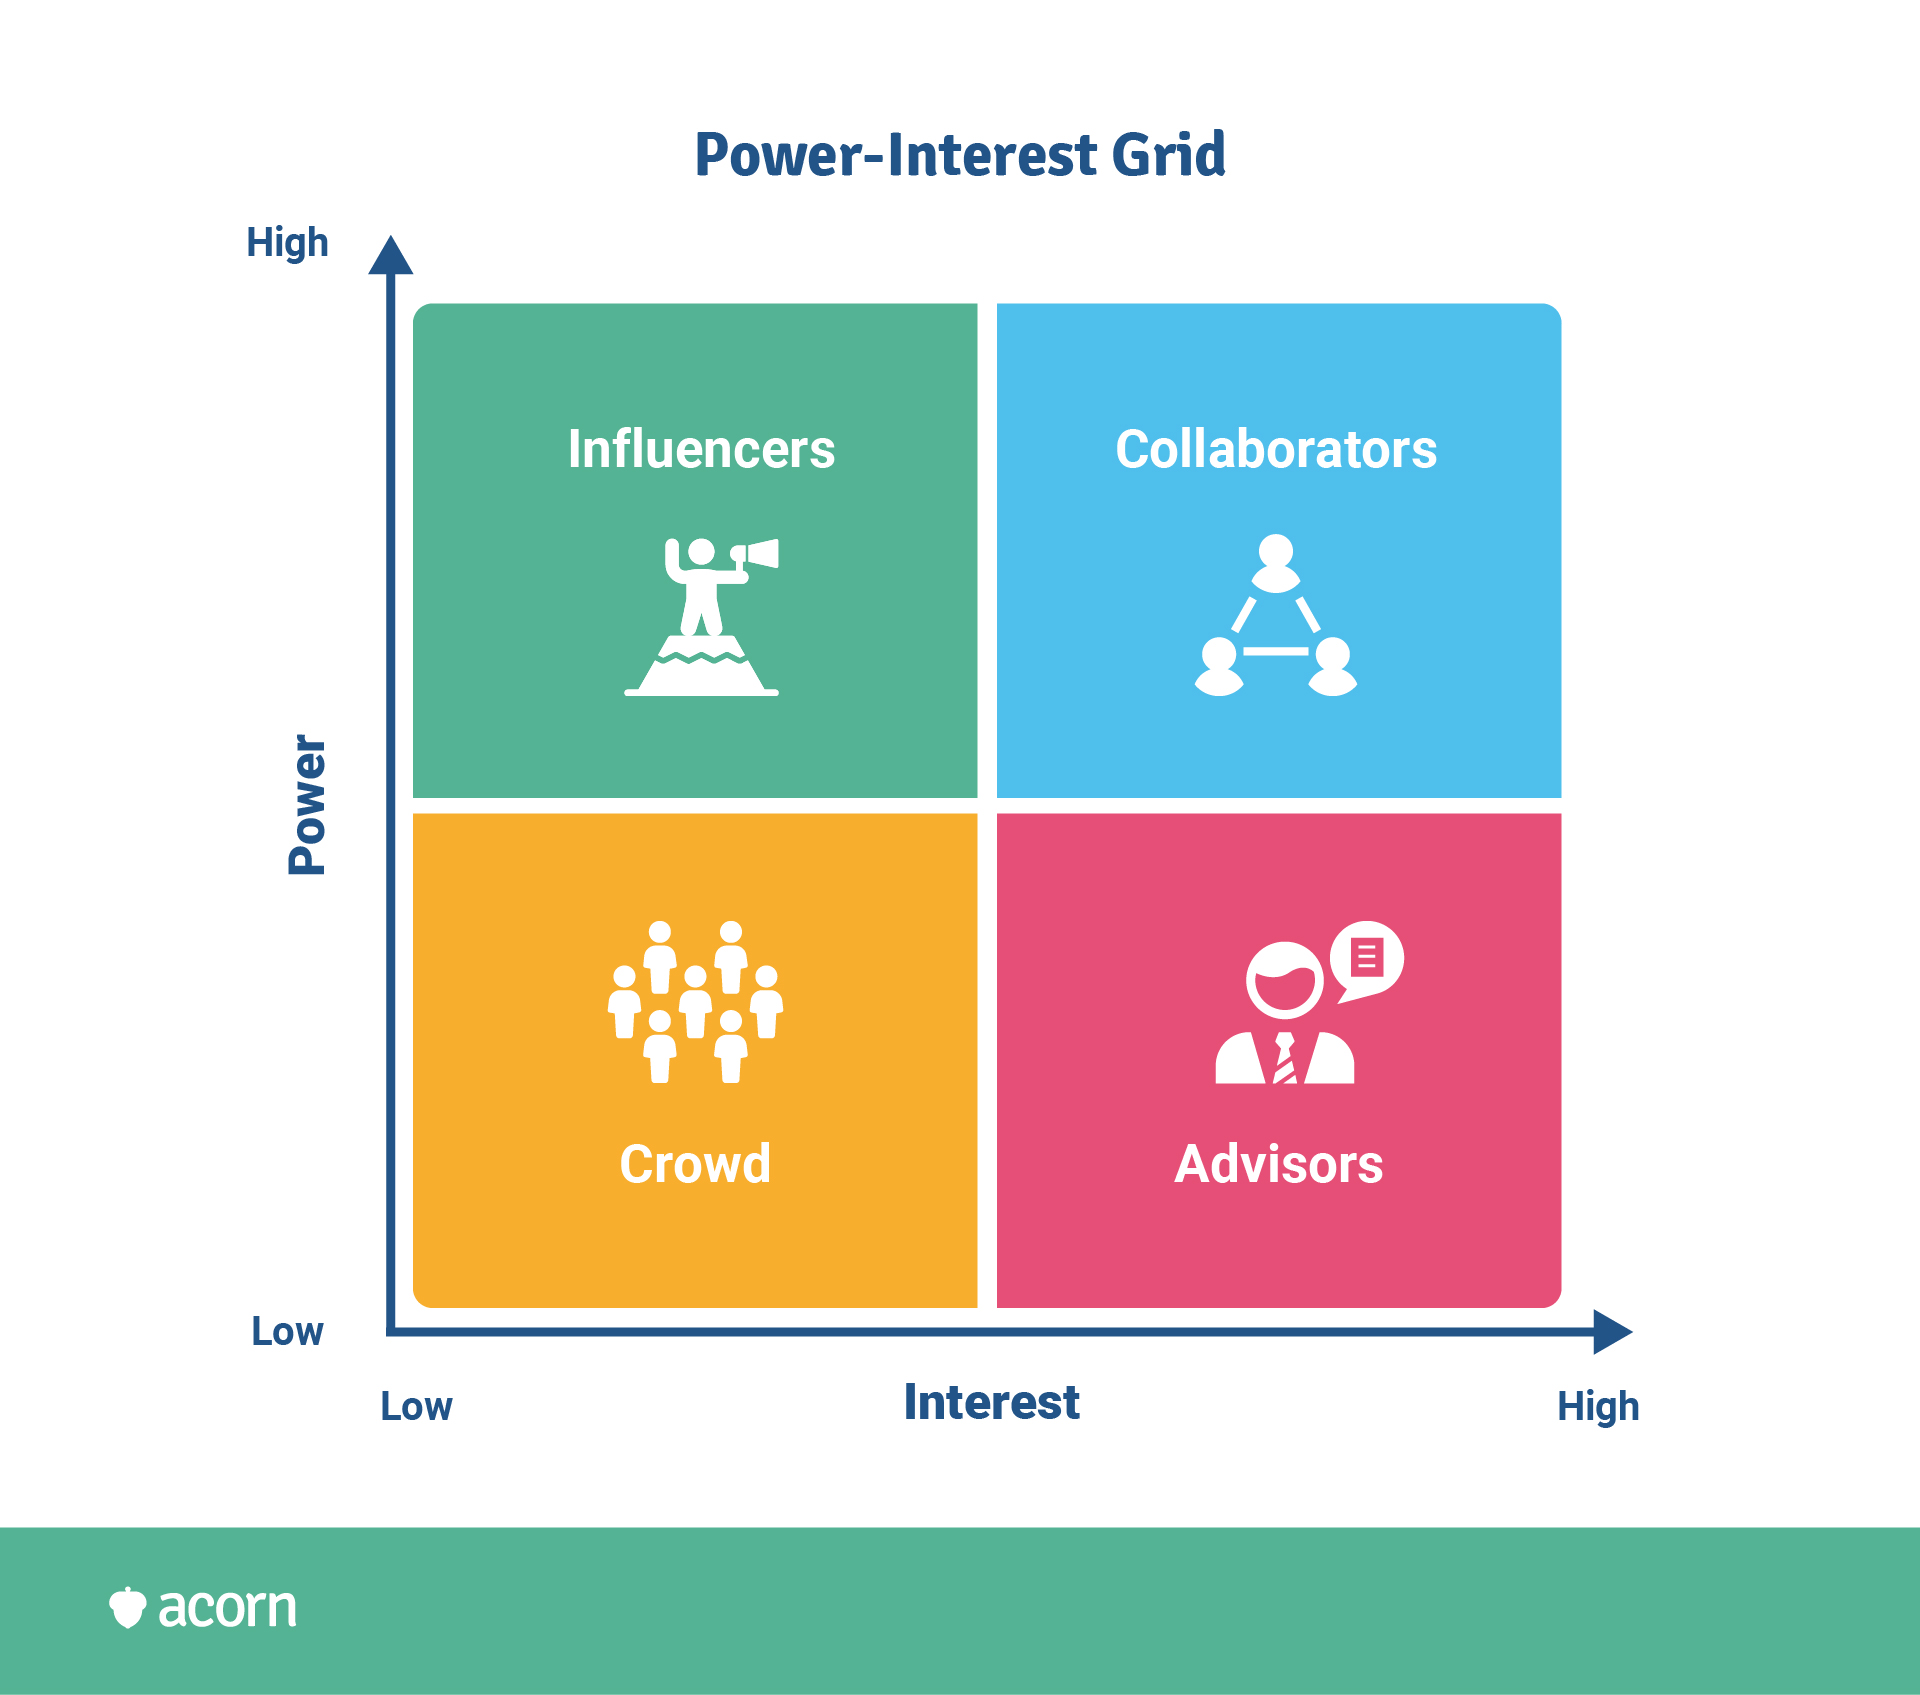 Power-interest grid of classifying stakeholders